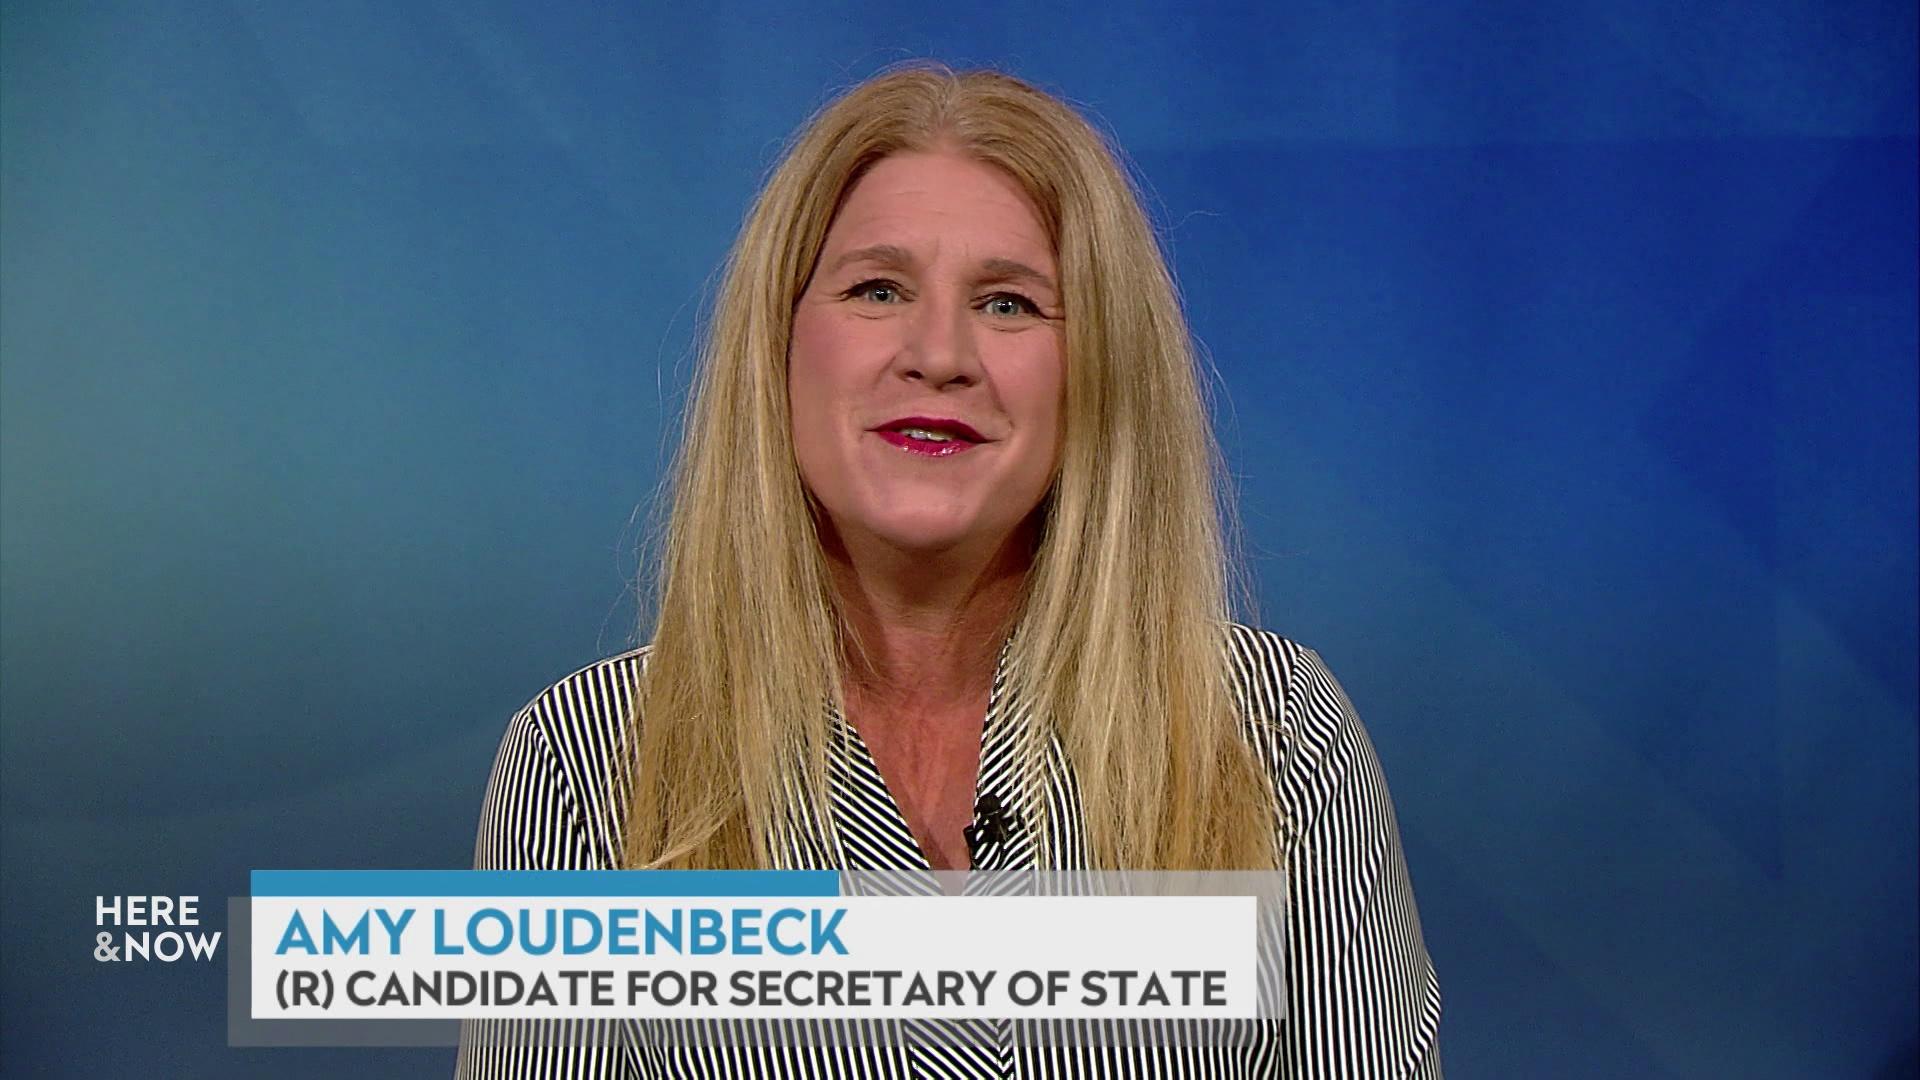 Rep. Amy Loudenbeck on her 2022 secretary of state campaign